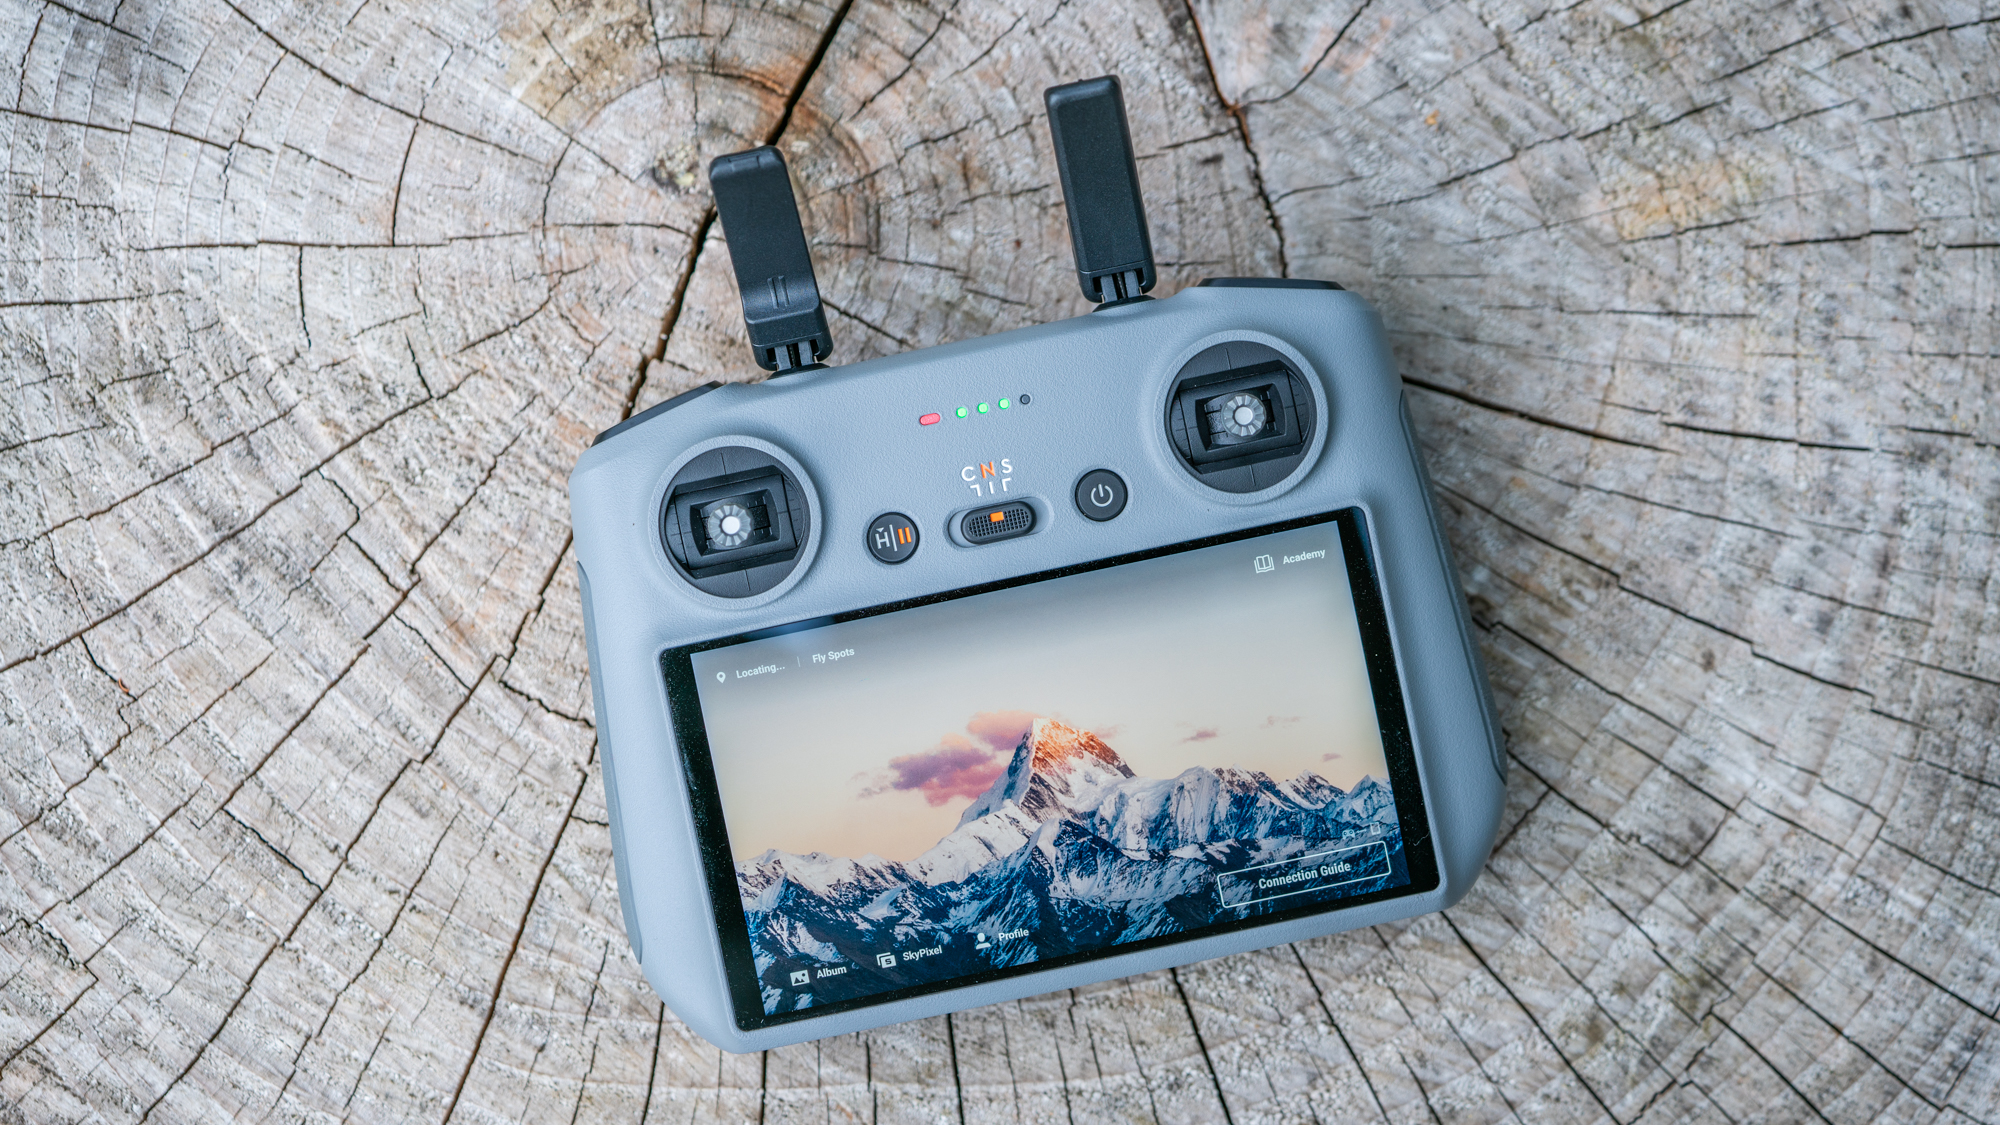 DJI Air 3 drone remote controller with built-in screen, on a tree stump